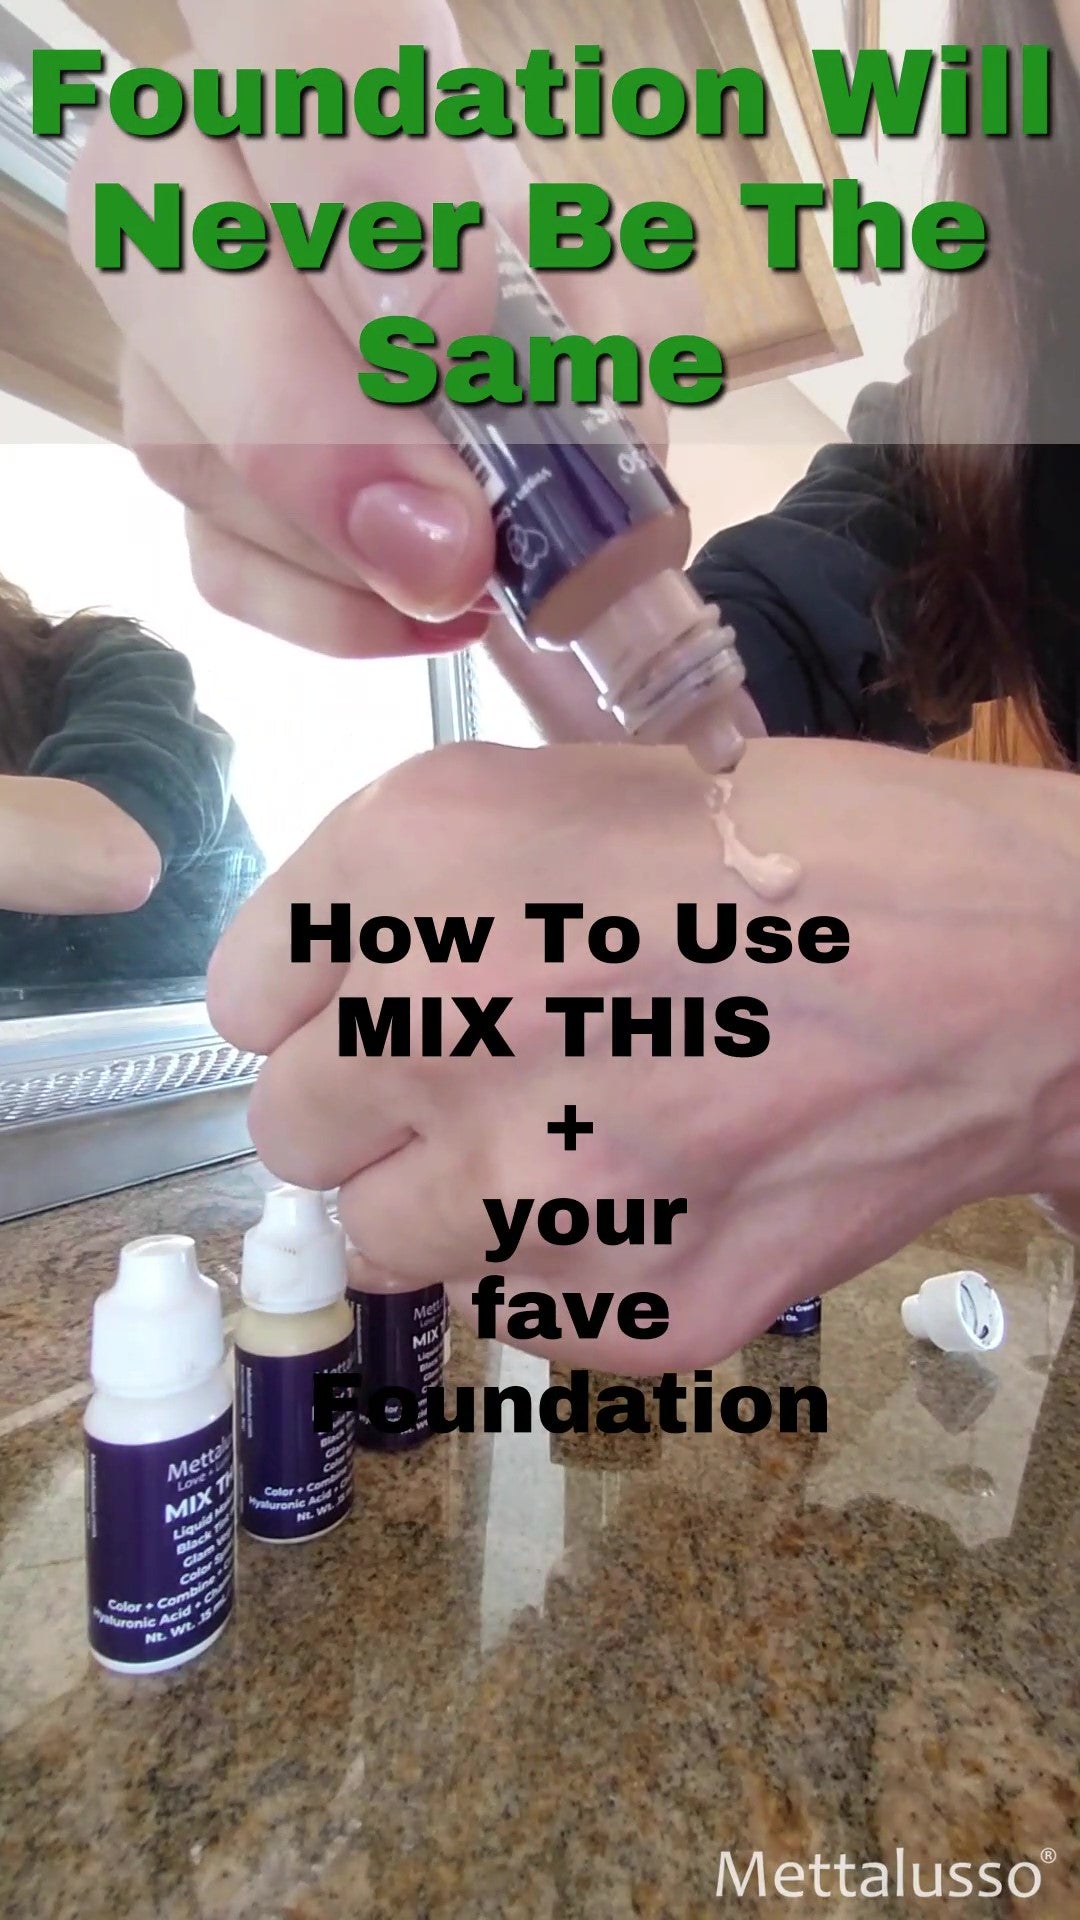 Load video: Mettalusso MIX THIS Liquid drops is vegan makeup to add to any current foundation or skincare or primer or SPF. Inclusive makeup shades.